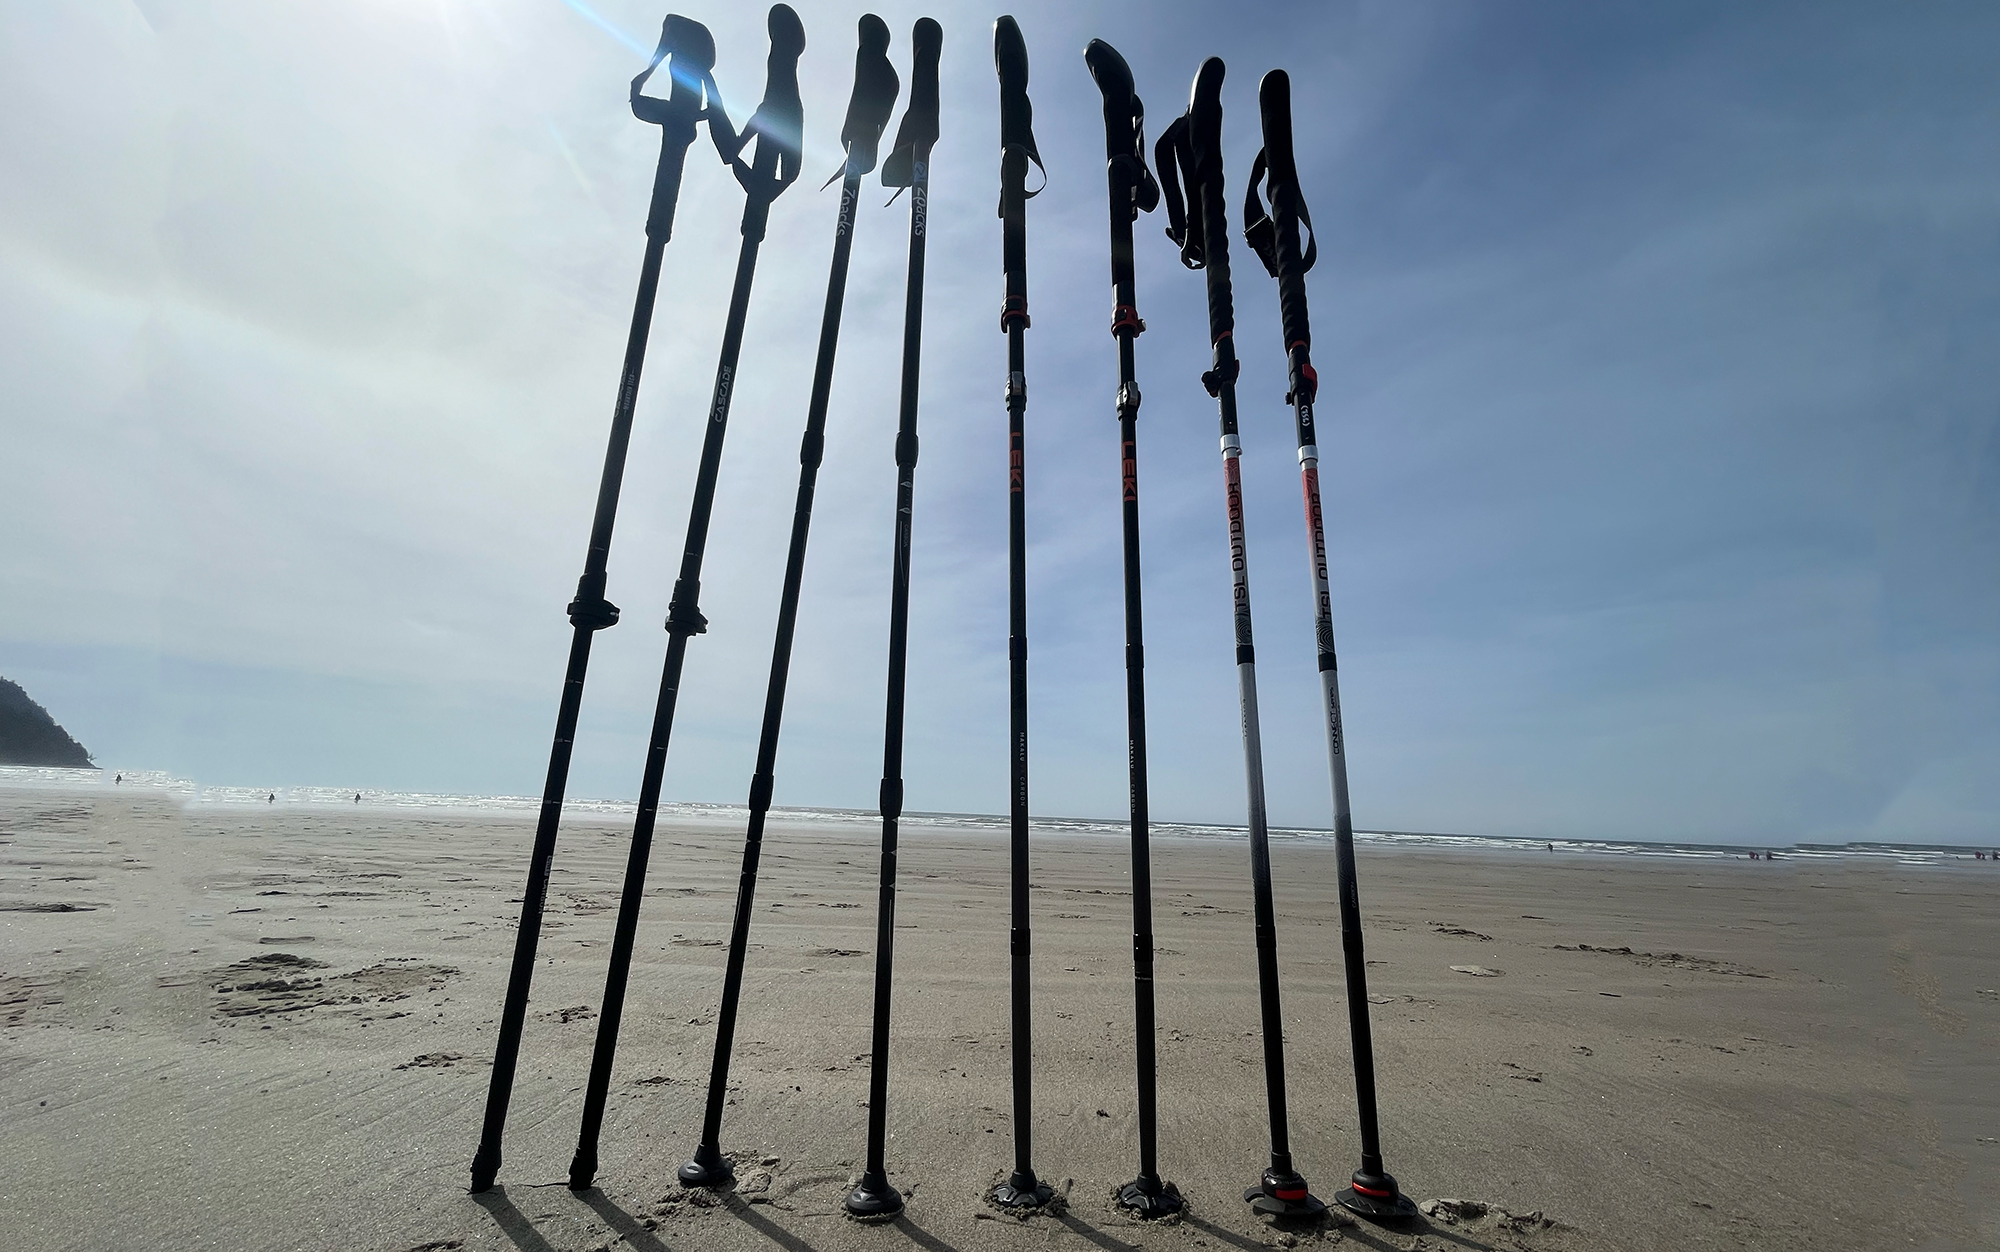 Most of the poles in this test are adjustable to find your ideal height, share your poles, set up a trekking pole shelter, and alter the height to your terrain.